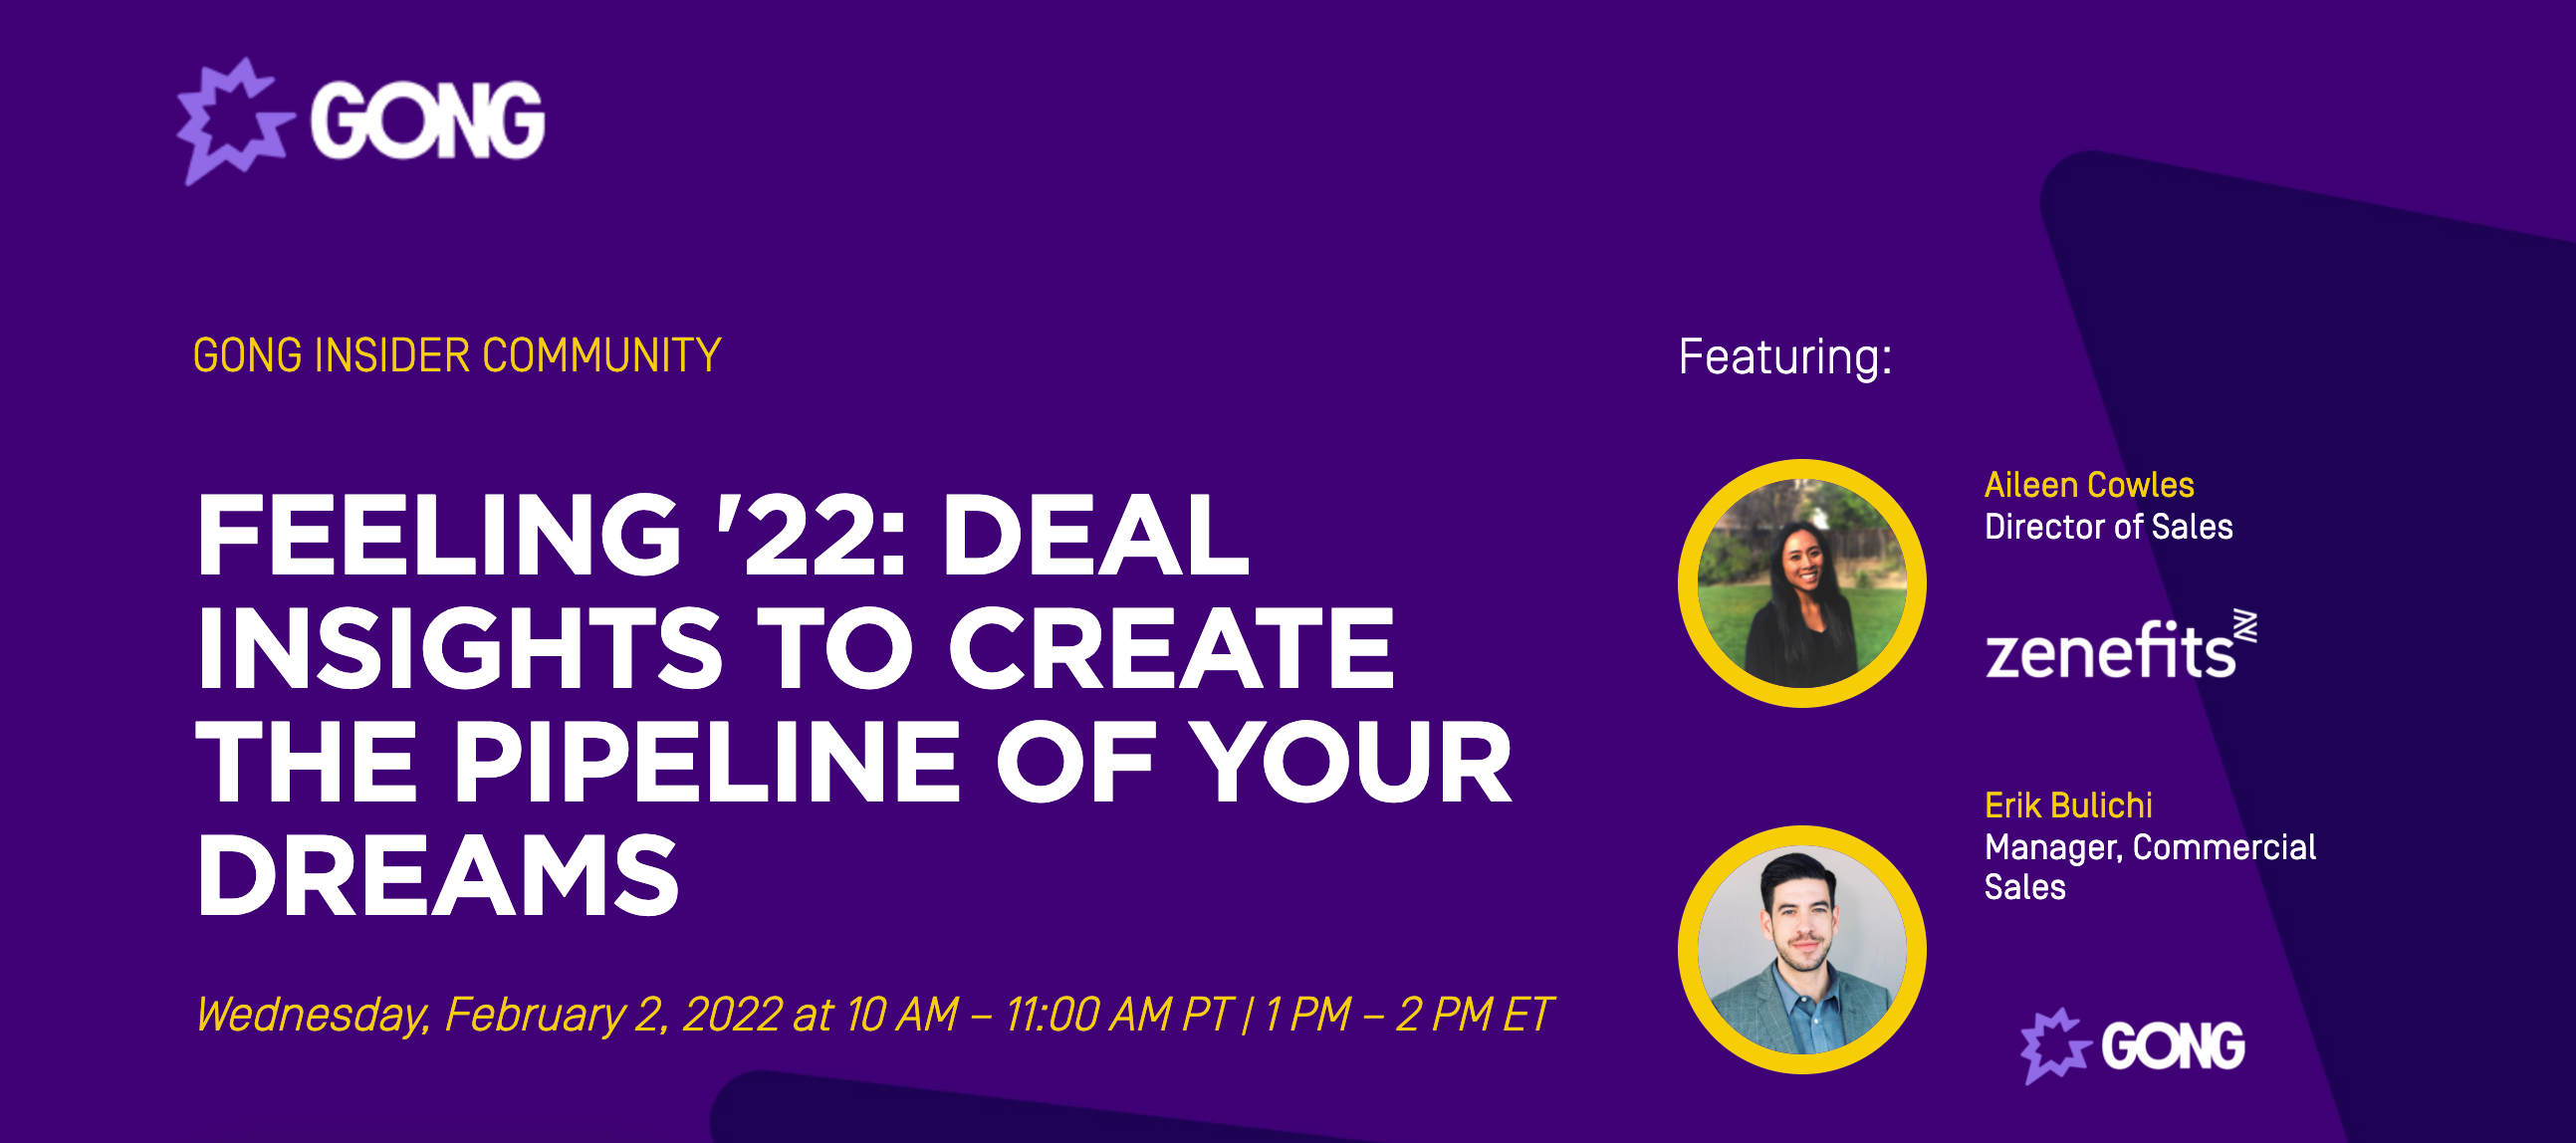 Tips from 'Feeling '22: Deal Insights to create the pipeline of your dreams'